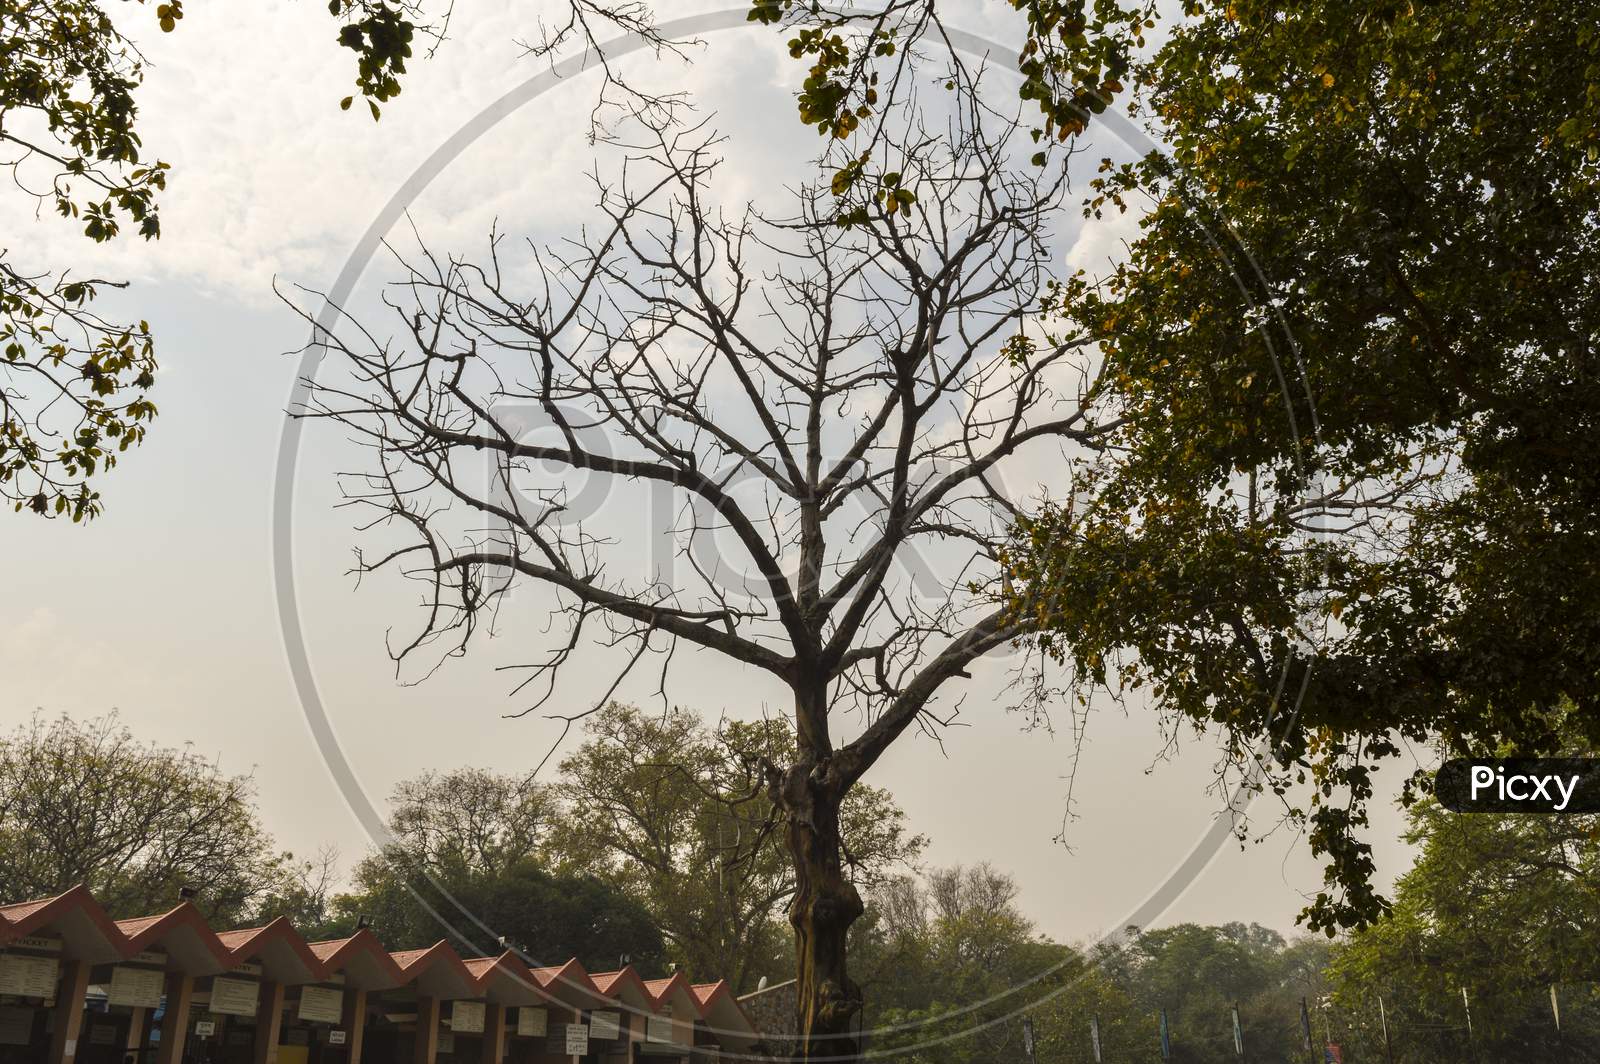 A Big Tree Which Is Located Outside Of Zoo And Old Fort With Sky.